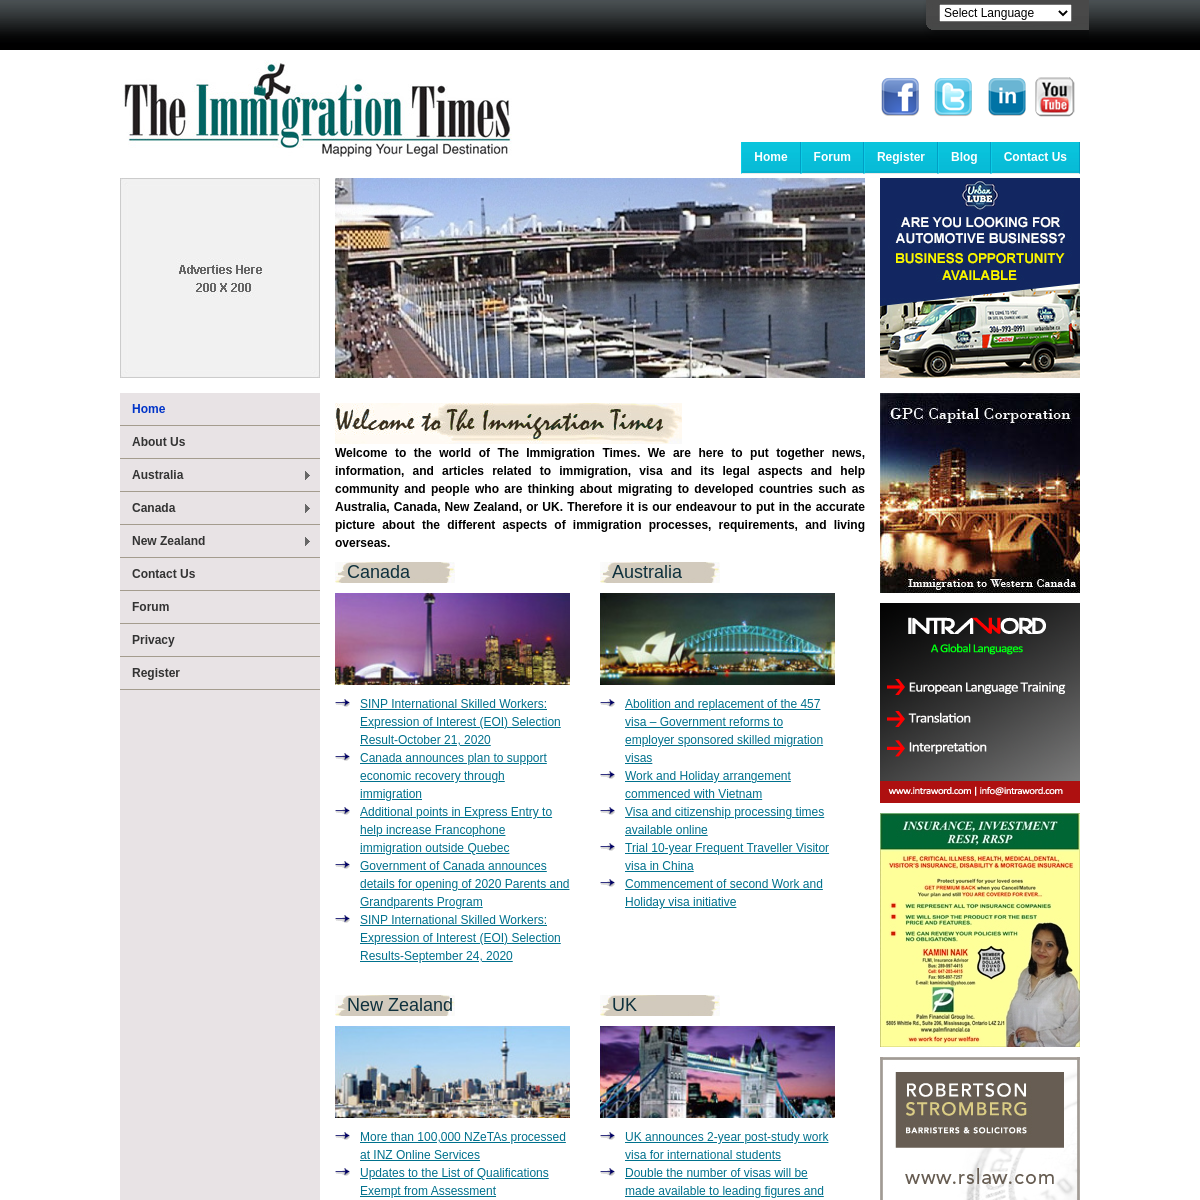 A complete backup of theimmigrationtimes.com